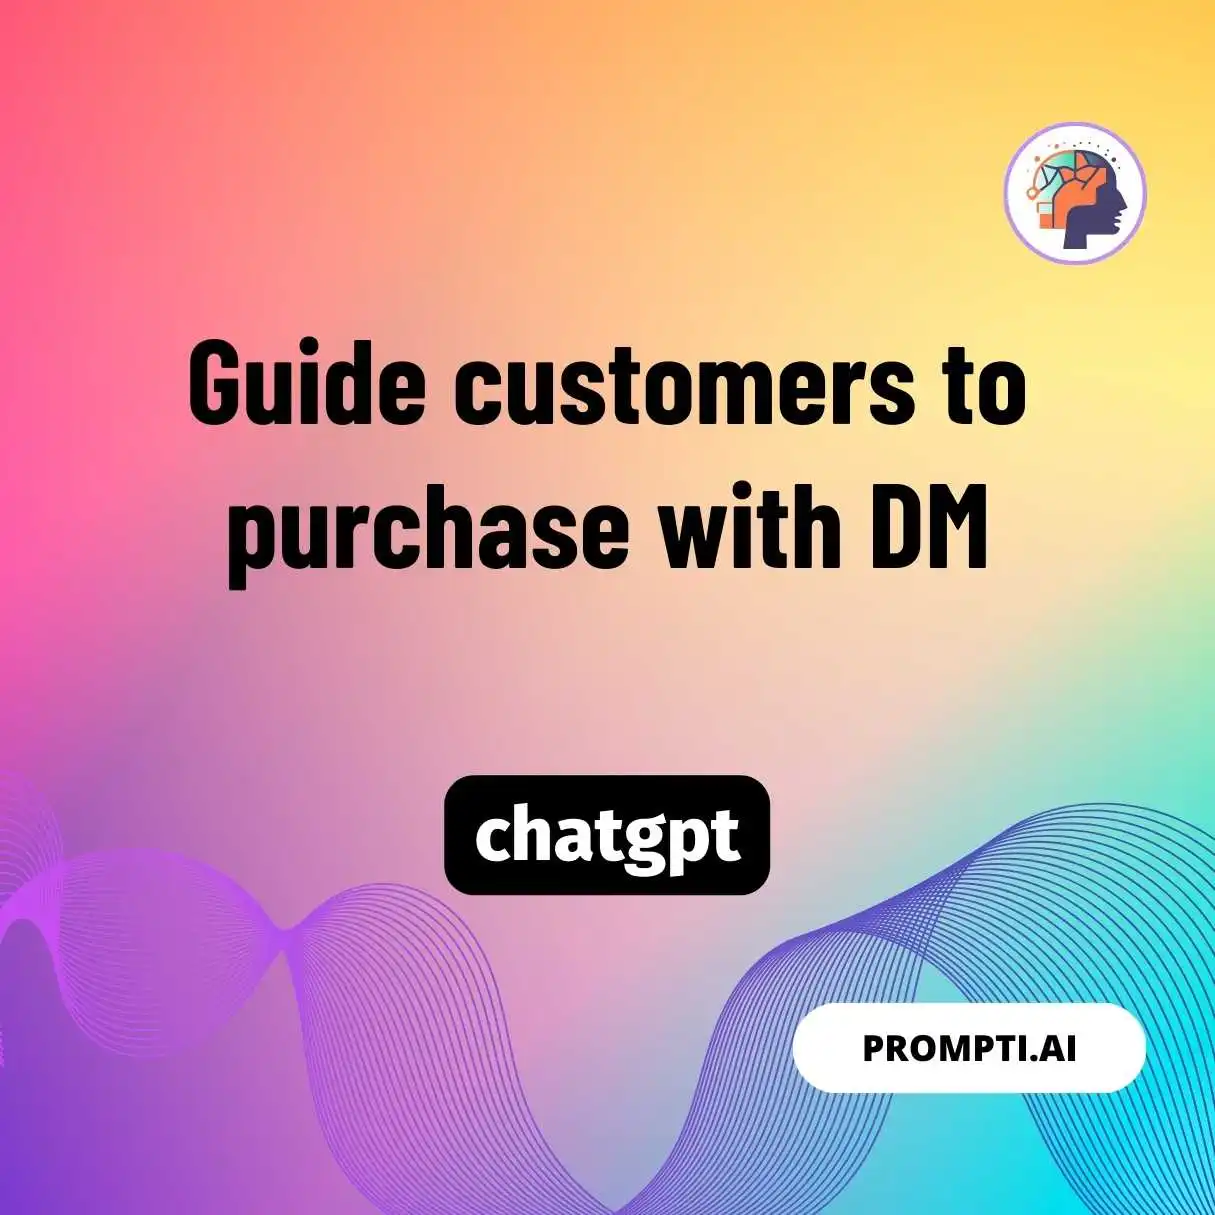 Guide customers to purchase with DM